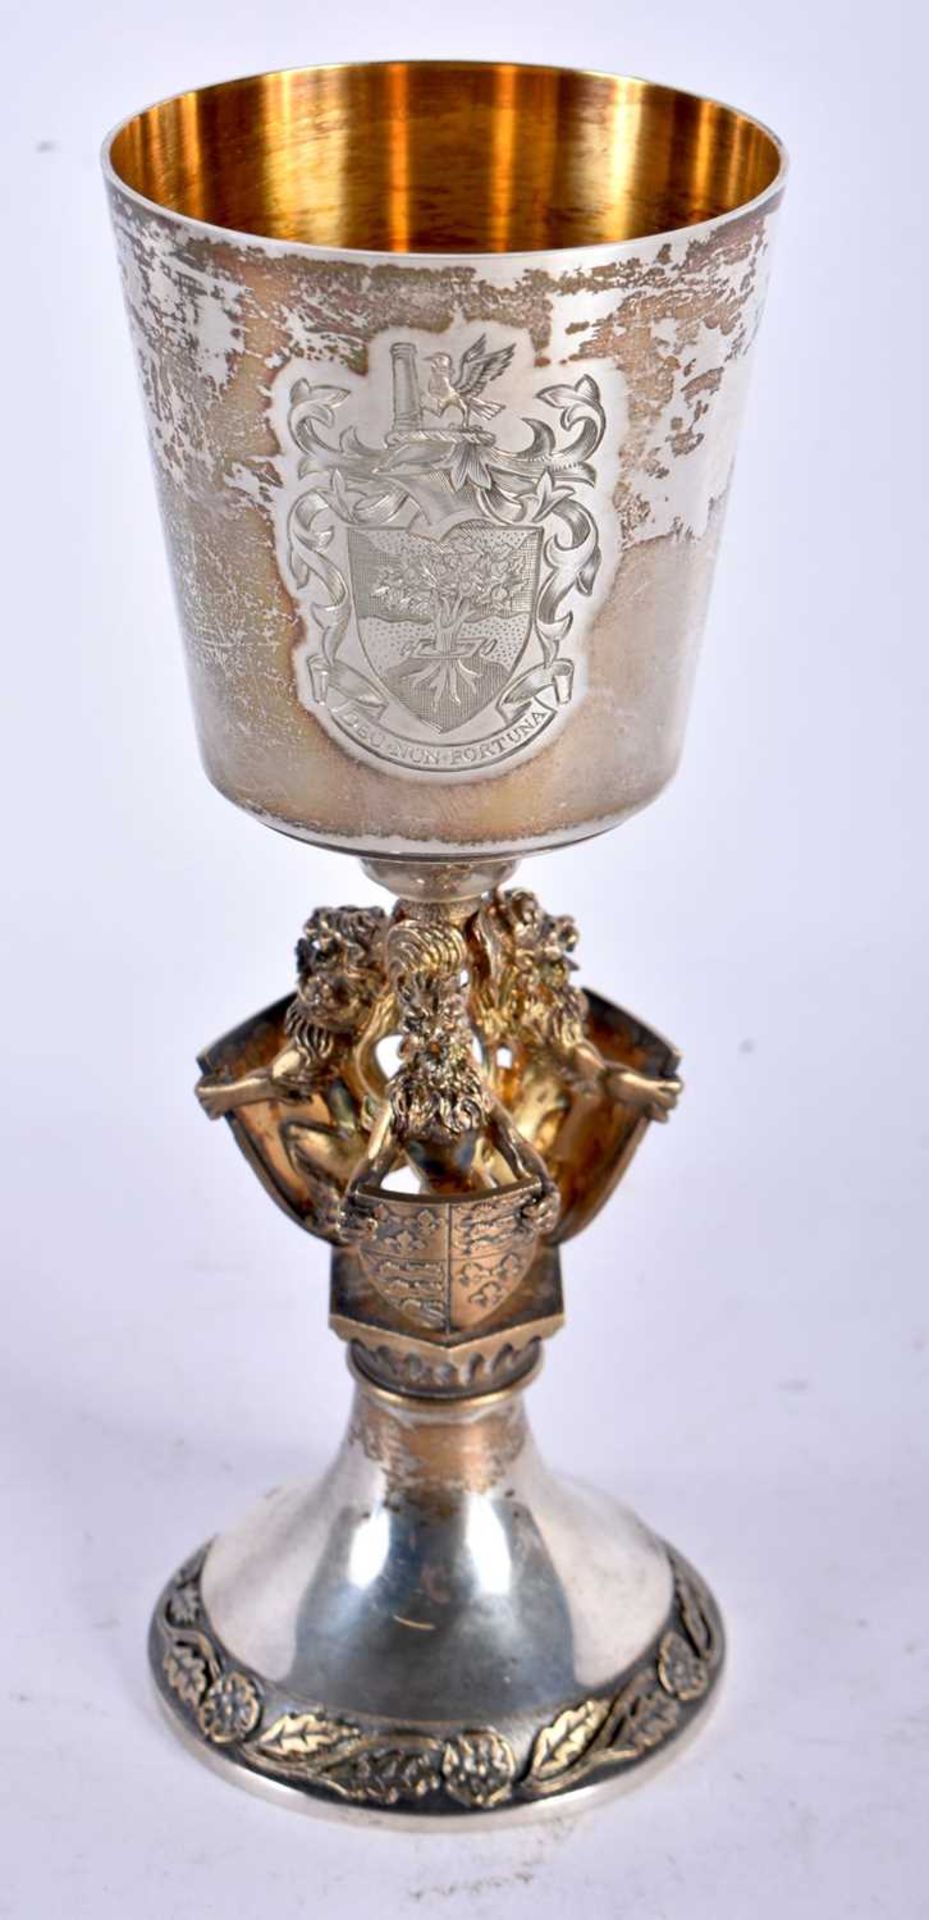 A LIMITED EDITION SILVER KINGS HERALDS QUINCENTENARY GOBLET IN 1984 OF THE COLLEGE OF ARMS. 295